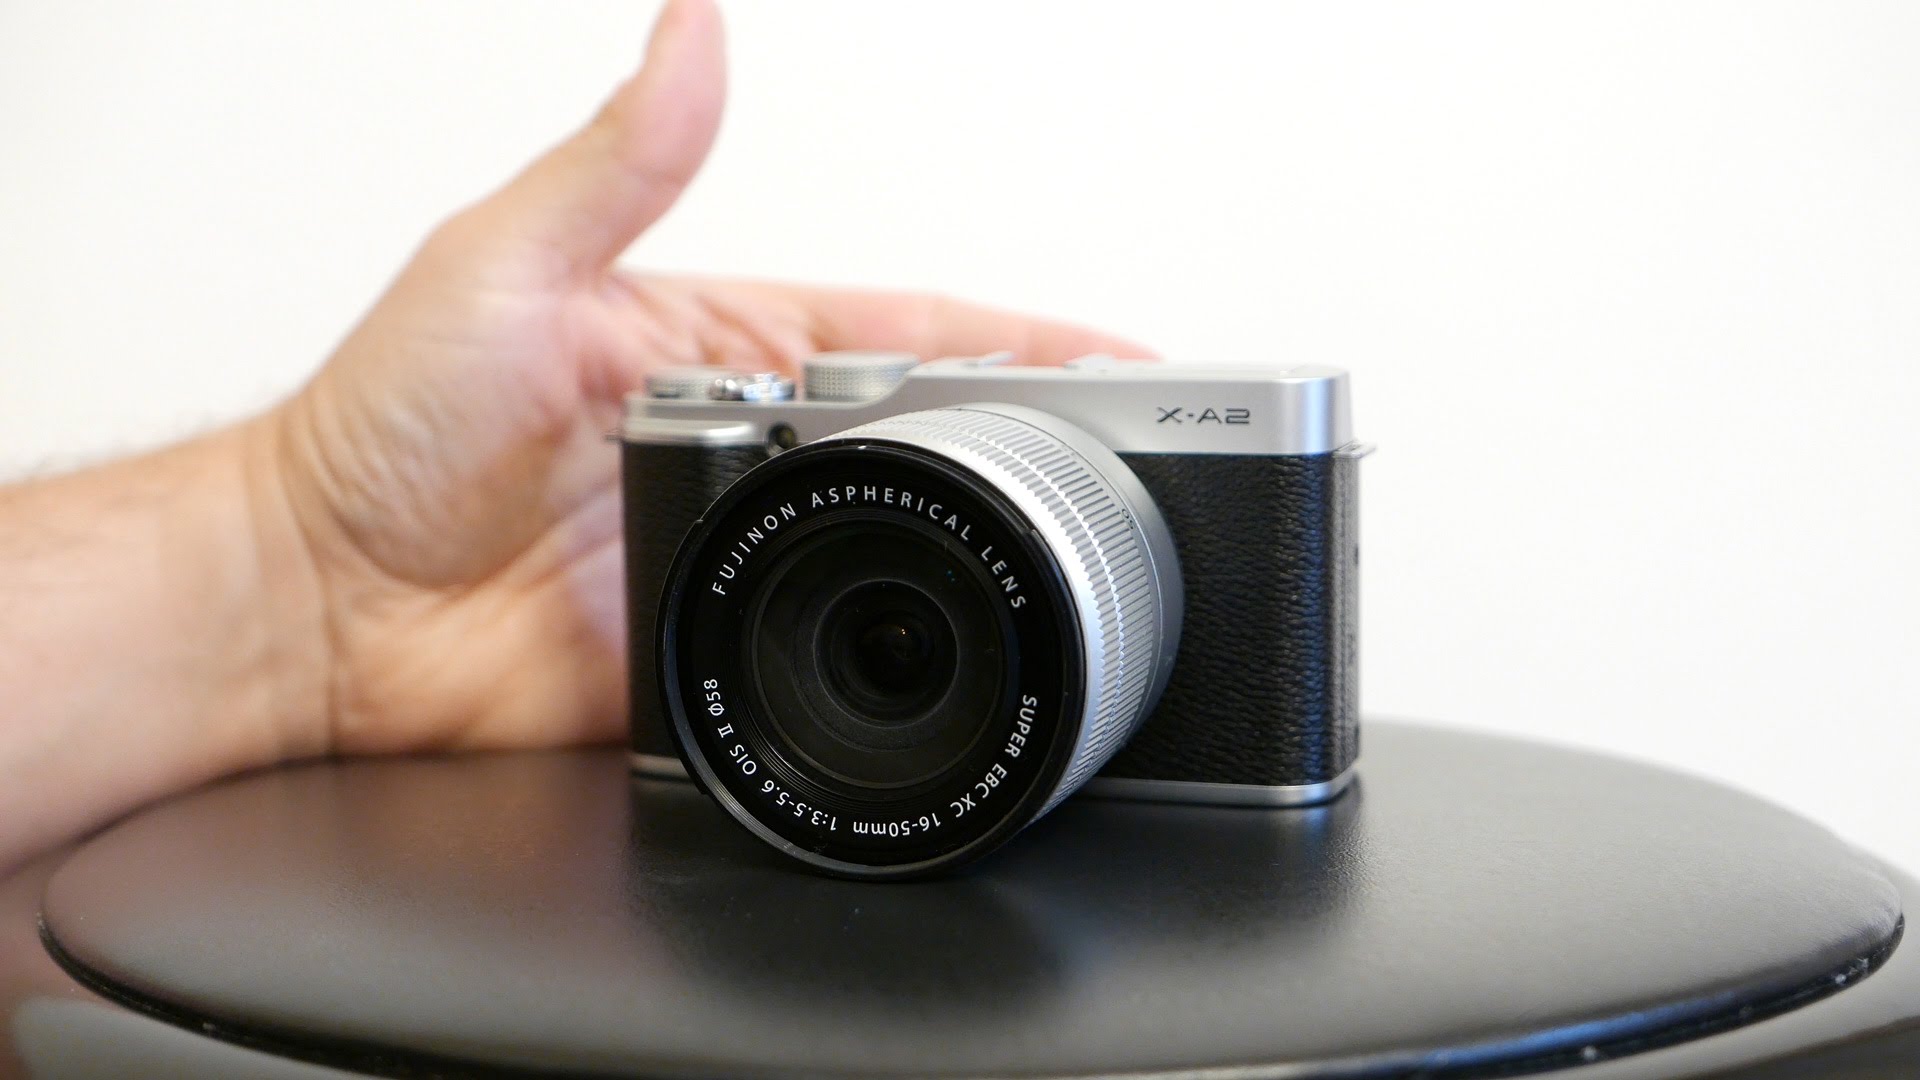 Fuji X A2: A Guided Tour of the Fuji X-A2 Mirrorless Digital Camera with 16-50mm Kit Lens